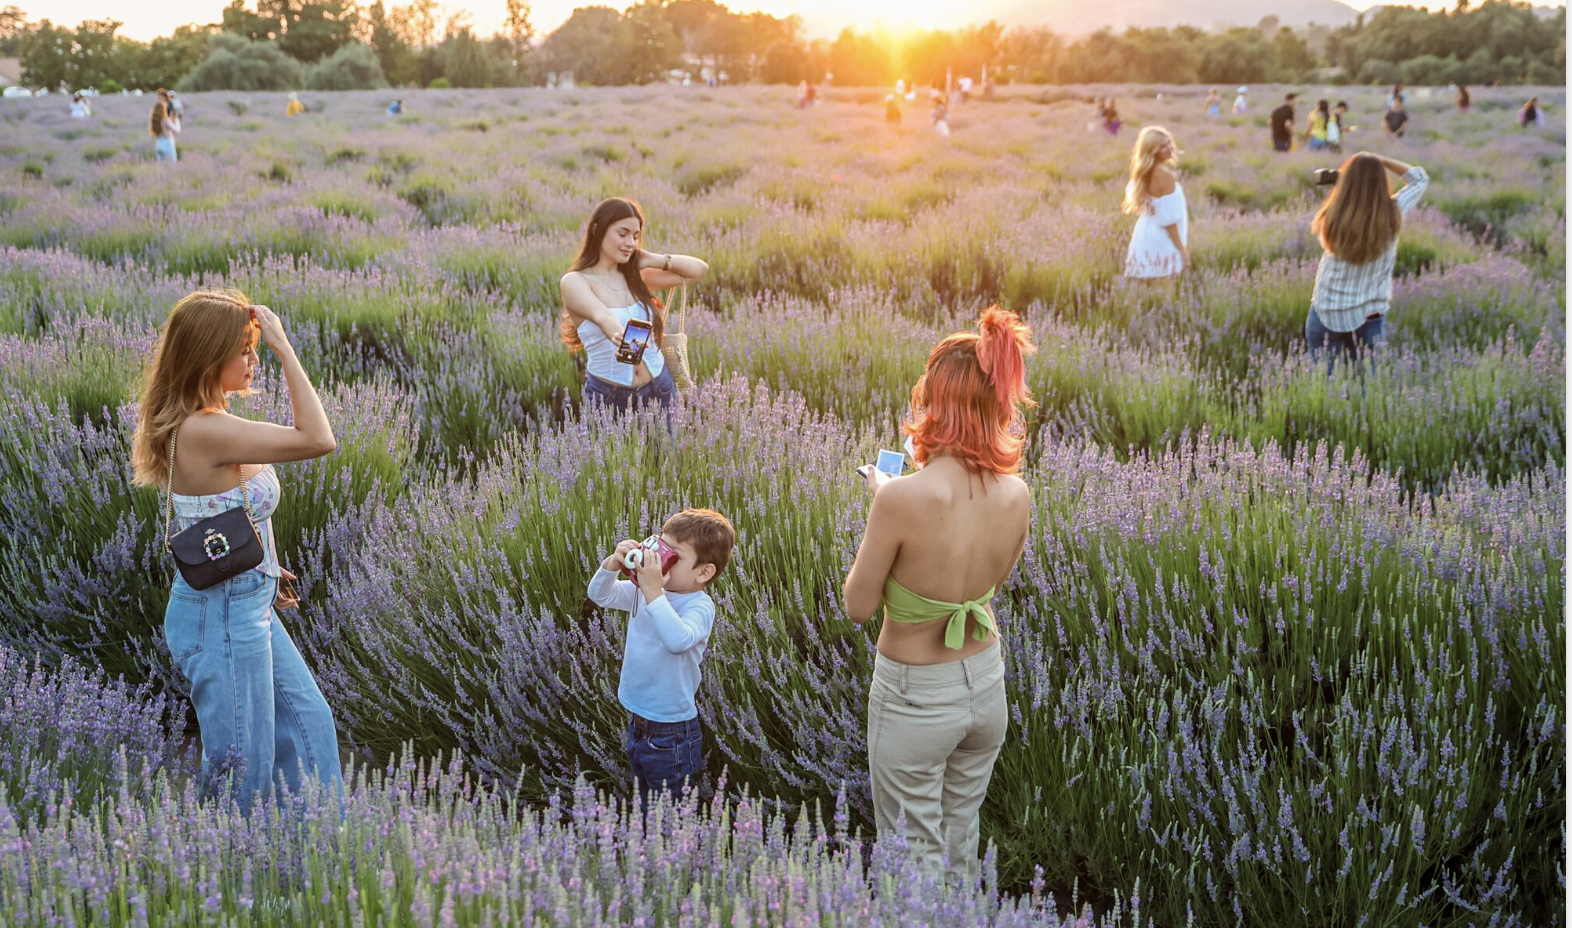 Perfect for start of summer instagram pictures, the lavender festival has especially great lighting at sunrise and sunset.